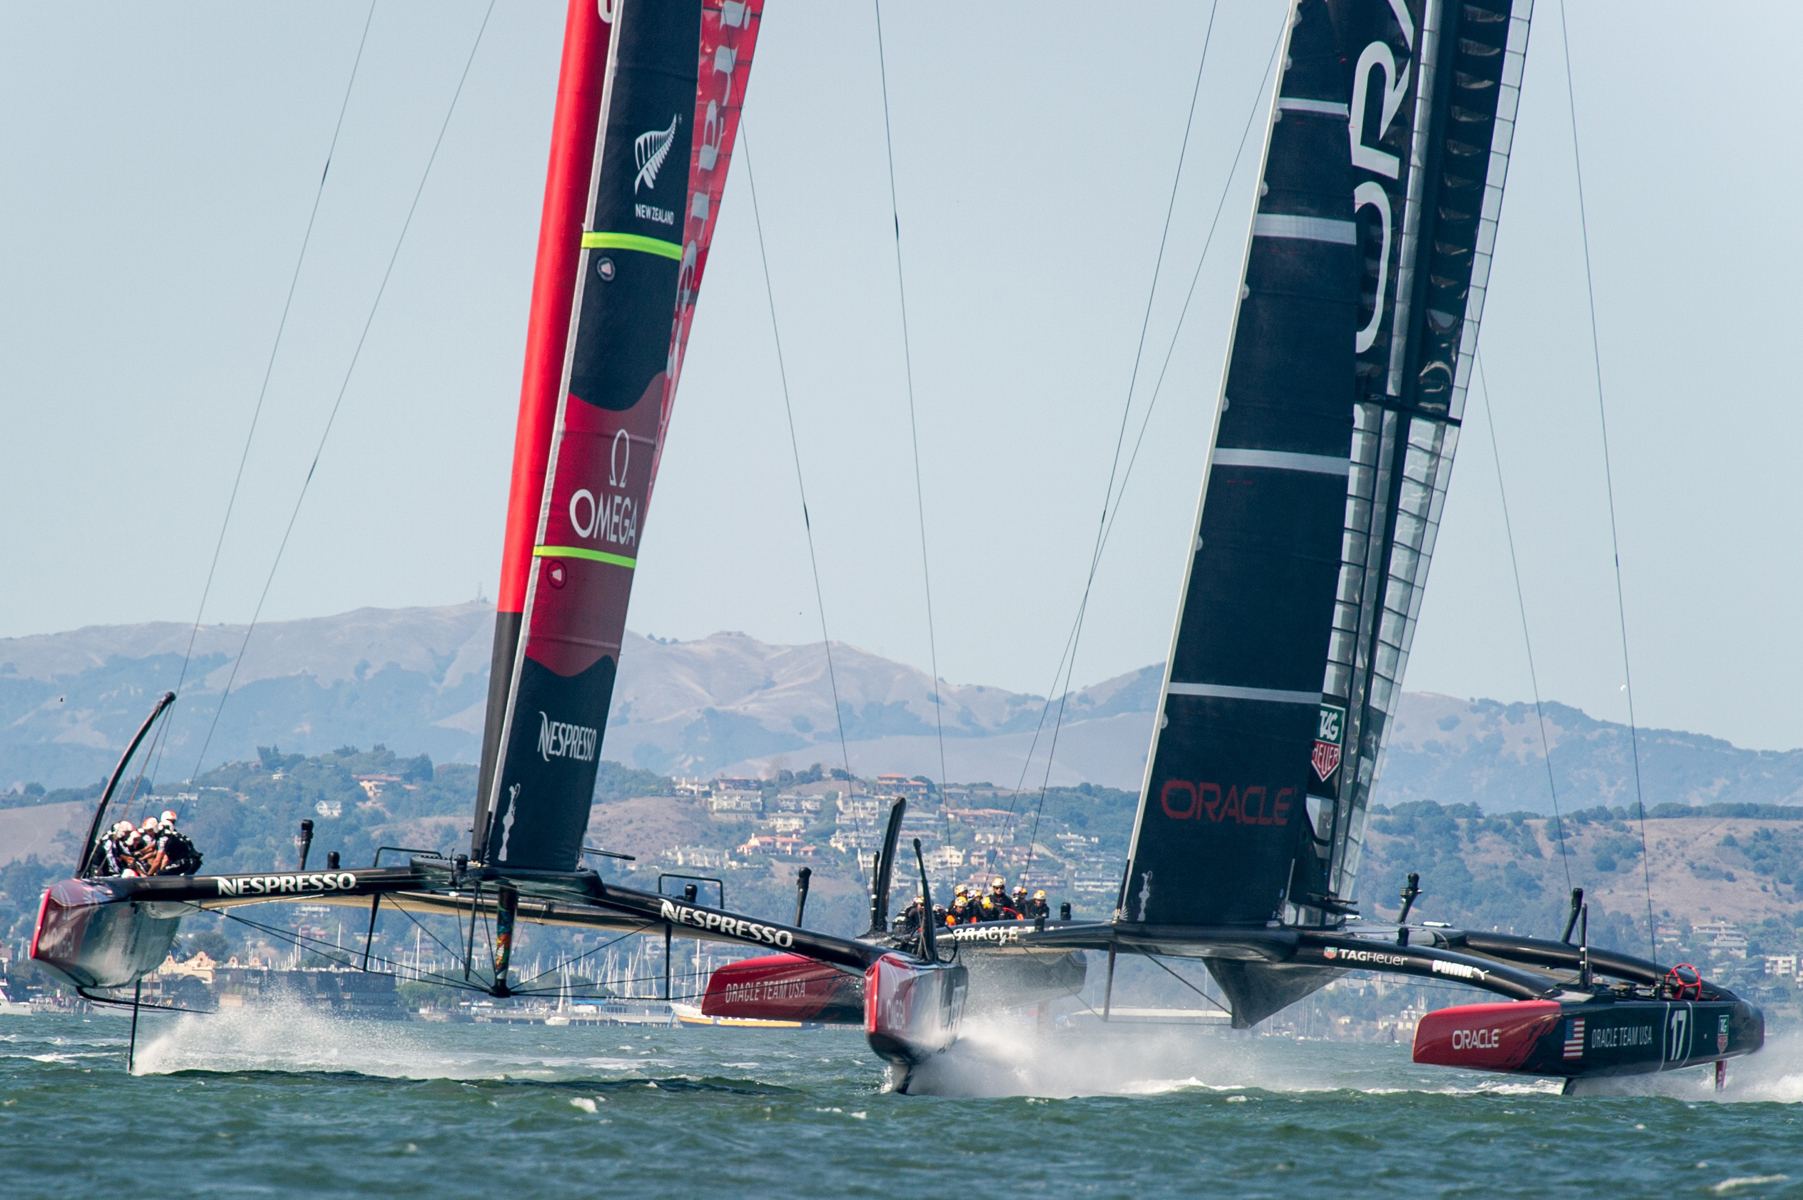 America’s Cup Sailboats with Vertical Axis Fixed-Wing Composite Sails